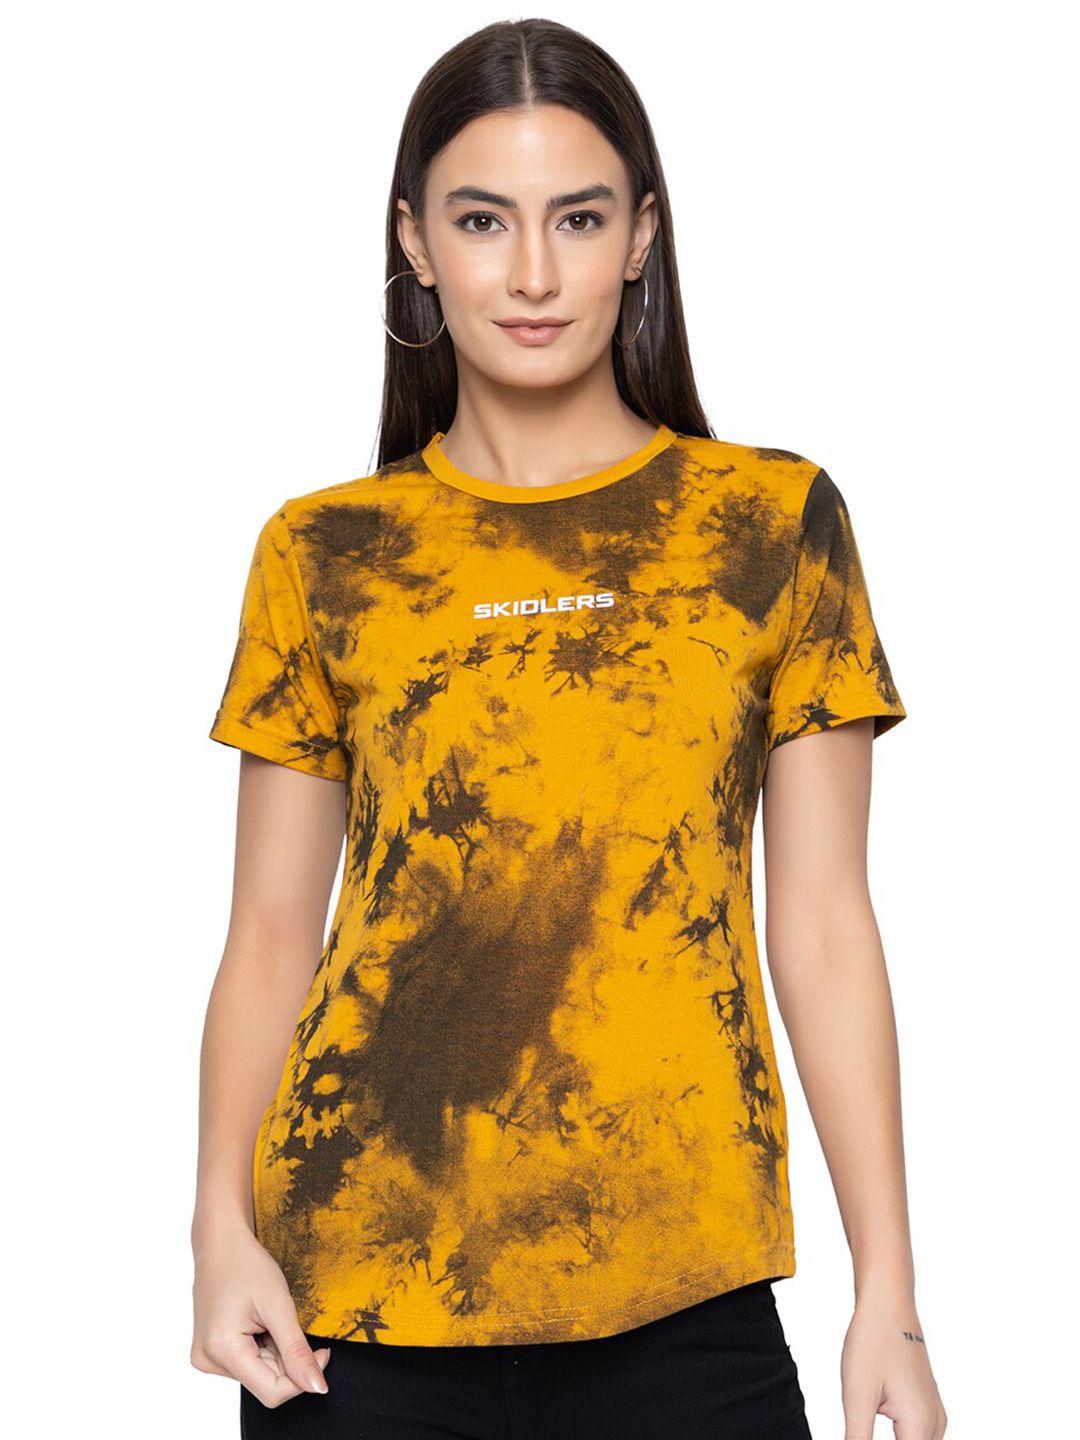 skidlers tie and dye cotton casual t-shirt